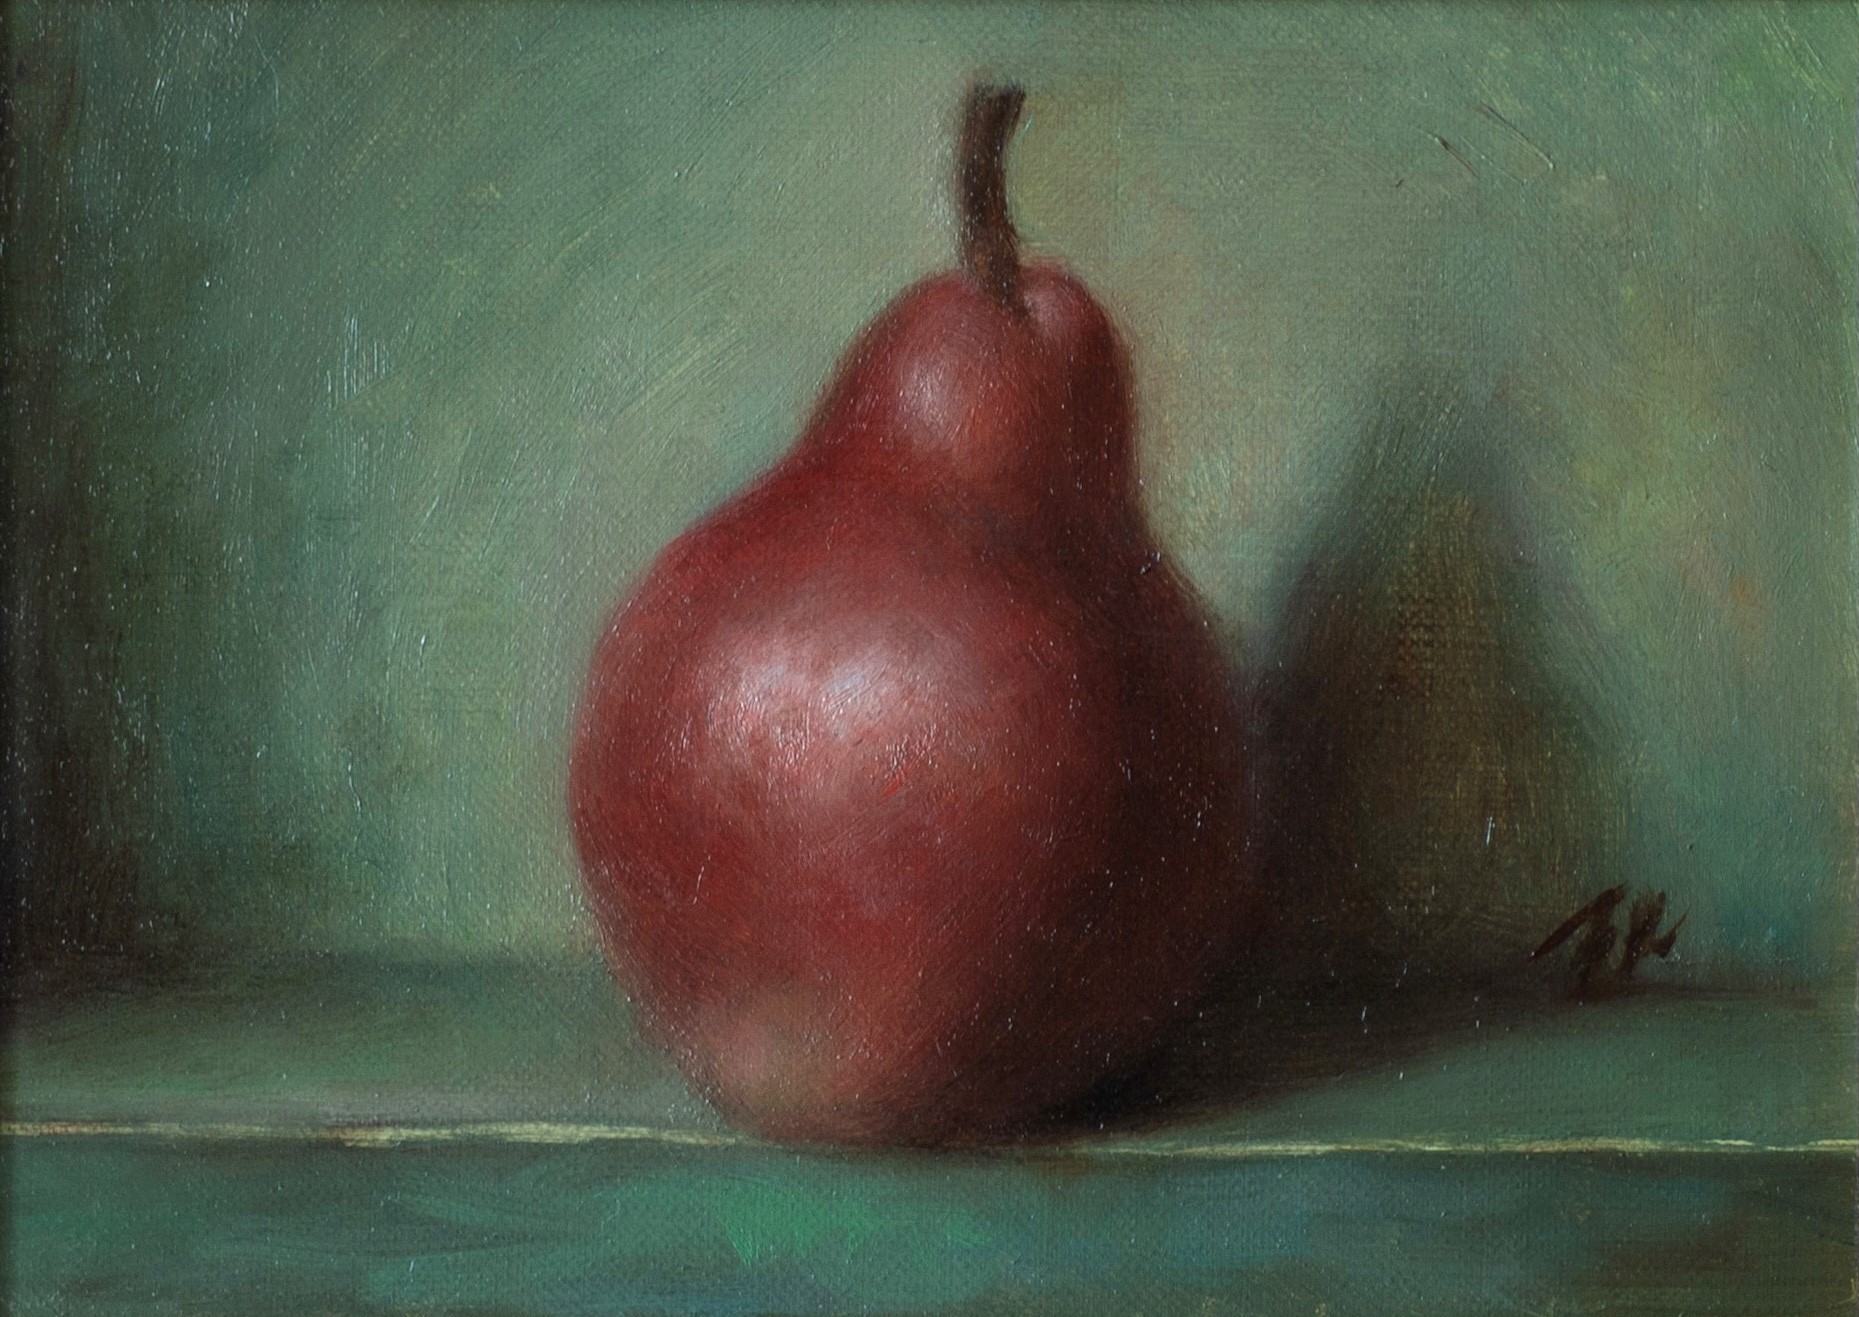 'Study of a Red Pear' by artist Ke Zhang